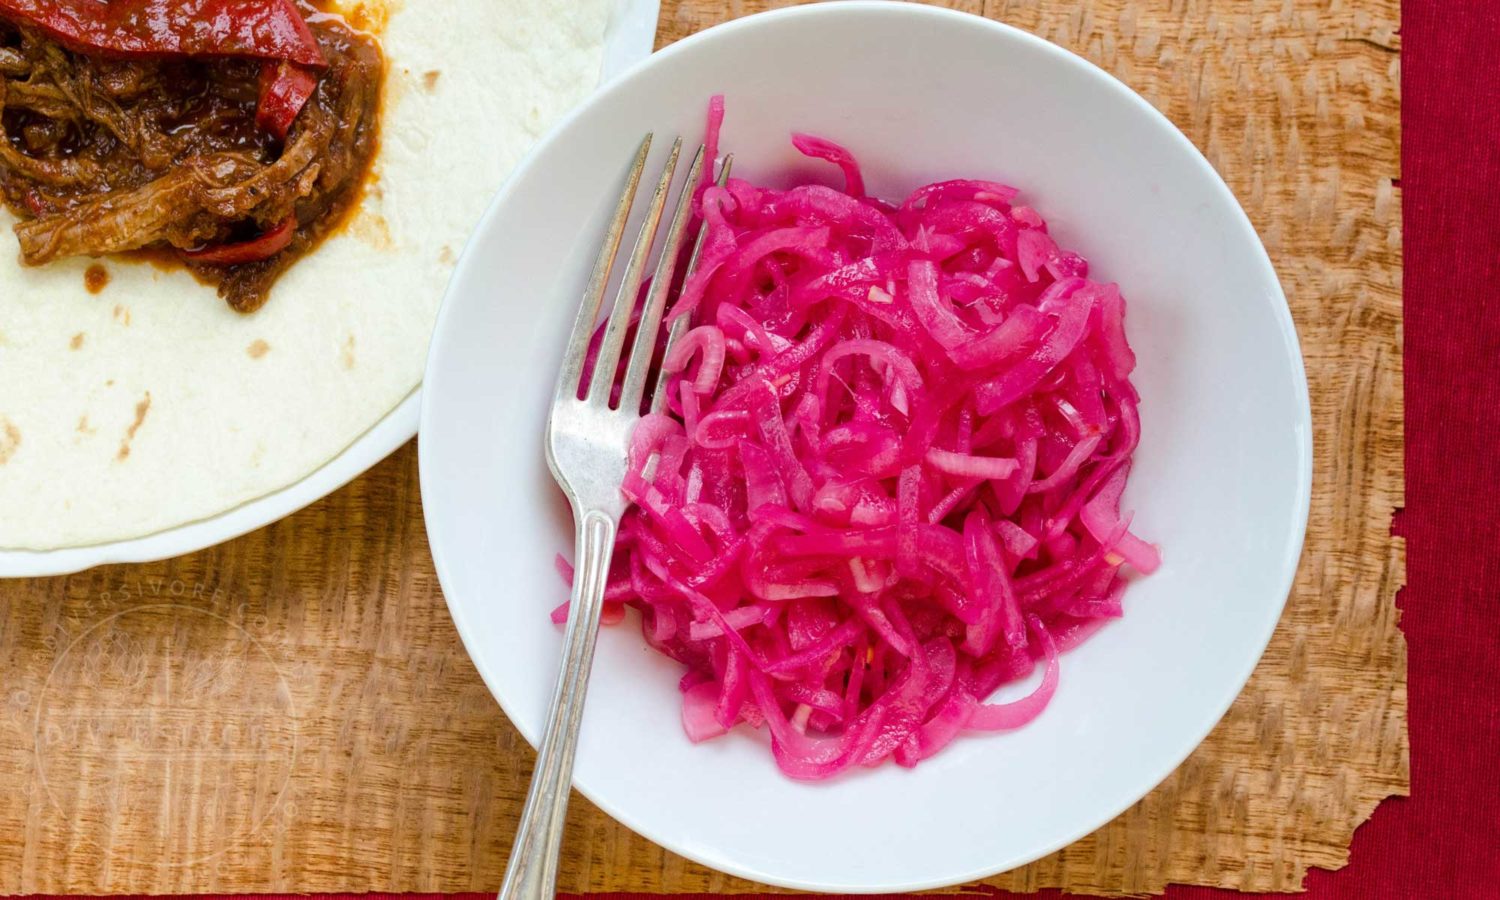 Yucatan-style pickled red onions, made with bitter (Seville) orange juice - Diversivore.com